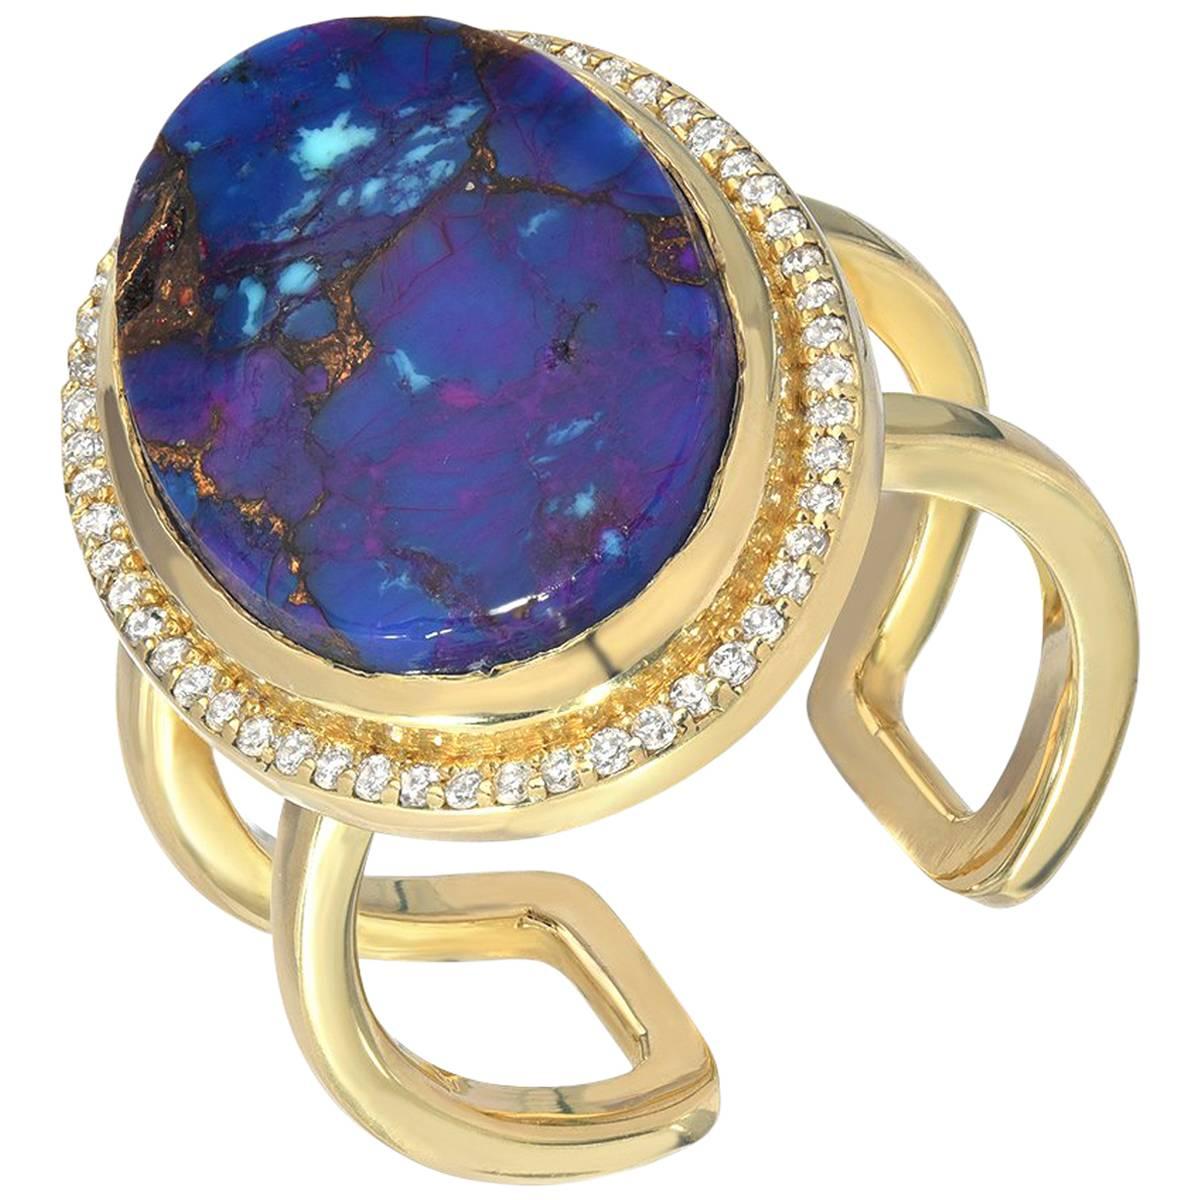 Boorma 18 Karat Yellow Gold Blue Turquoise and Pave Diamond Ring For Sale